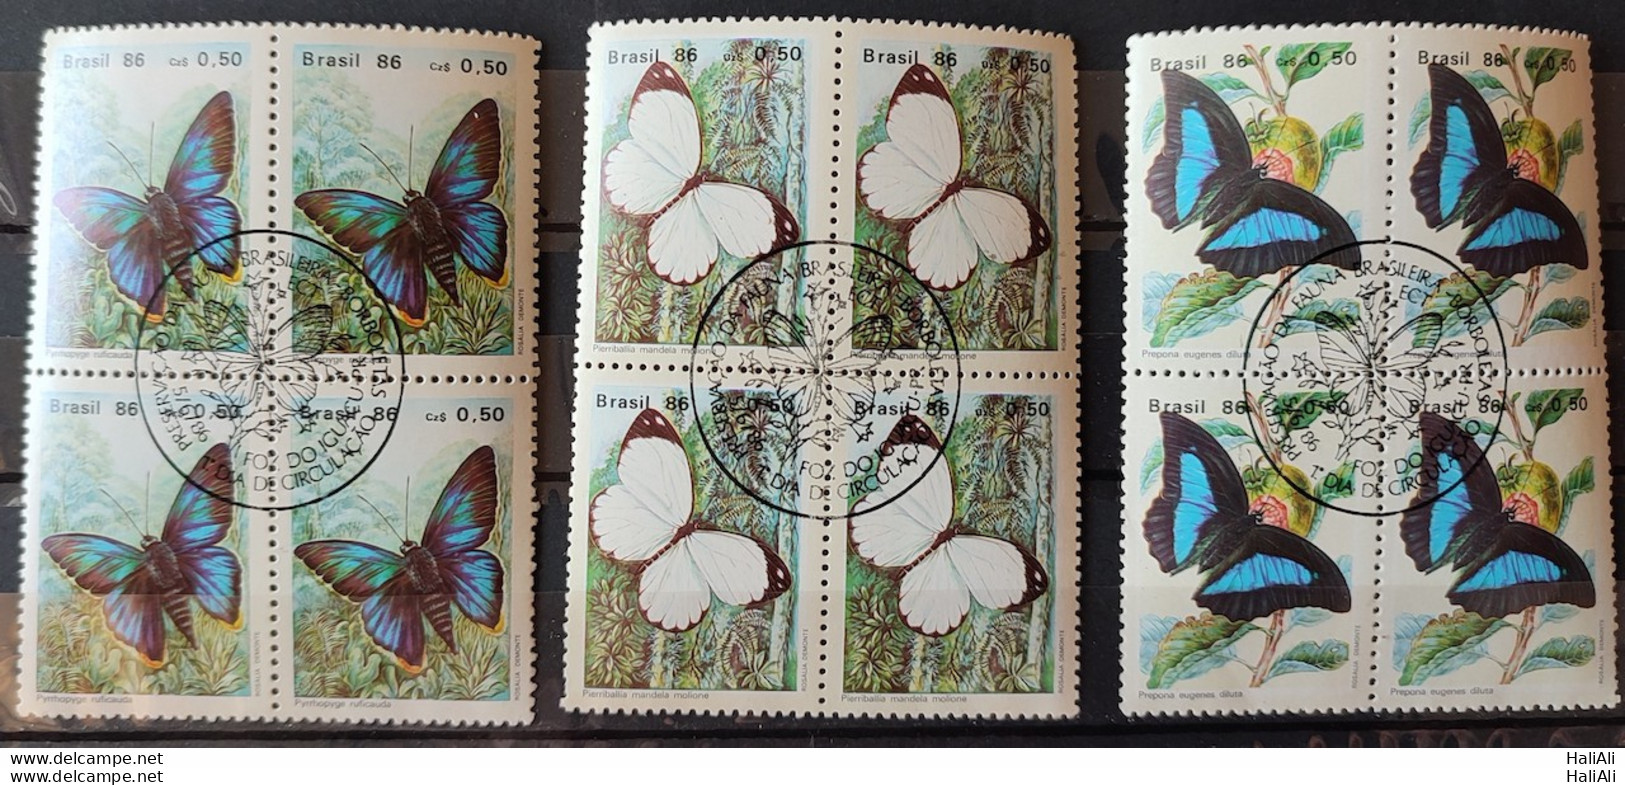 C 1512 Brazil Stamp Butterfly Insects 1986 Block Of 4 CBC PR Complete Series 2.jpg - Neufs